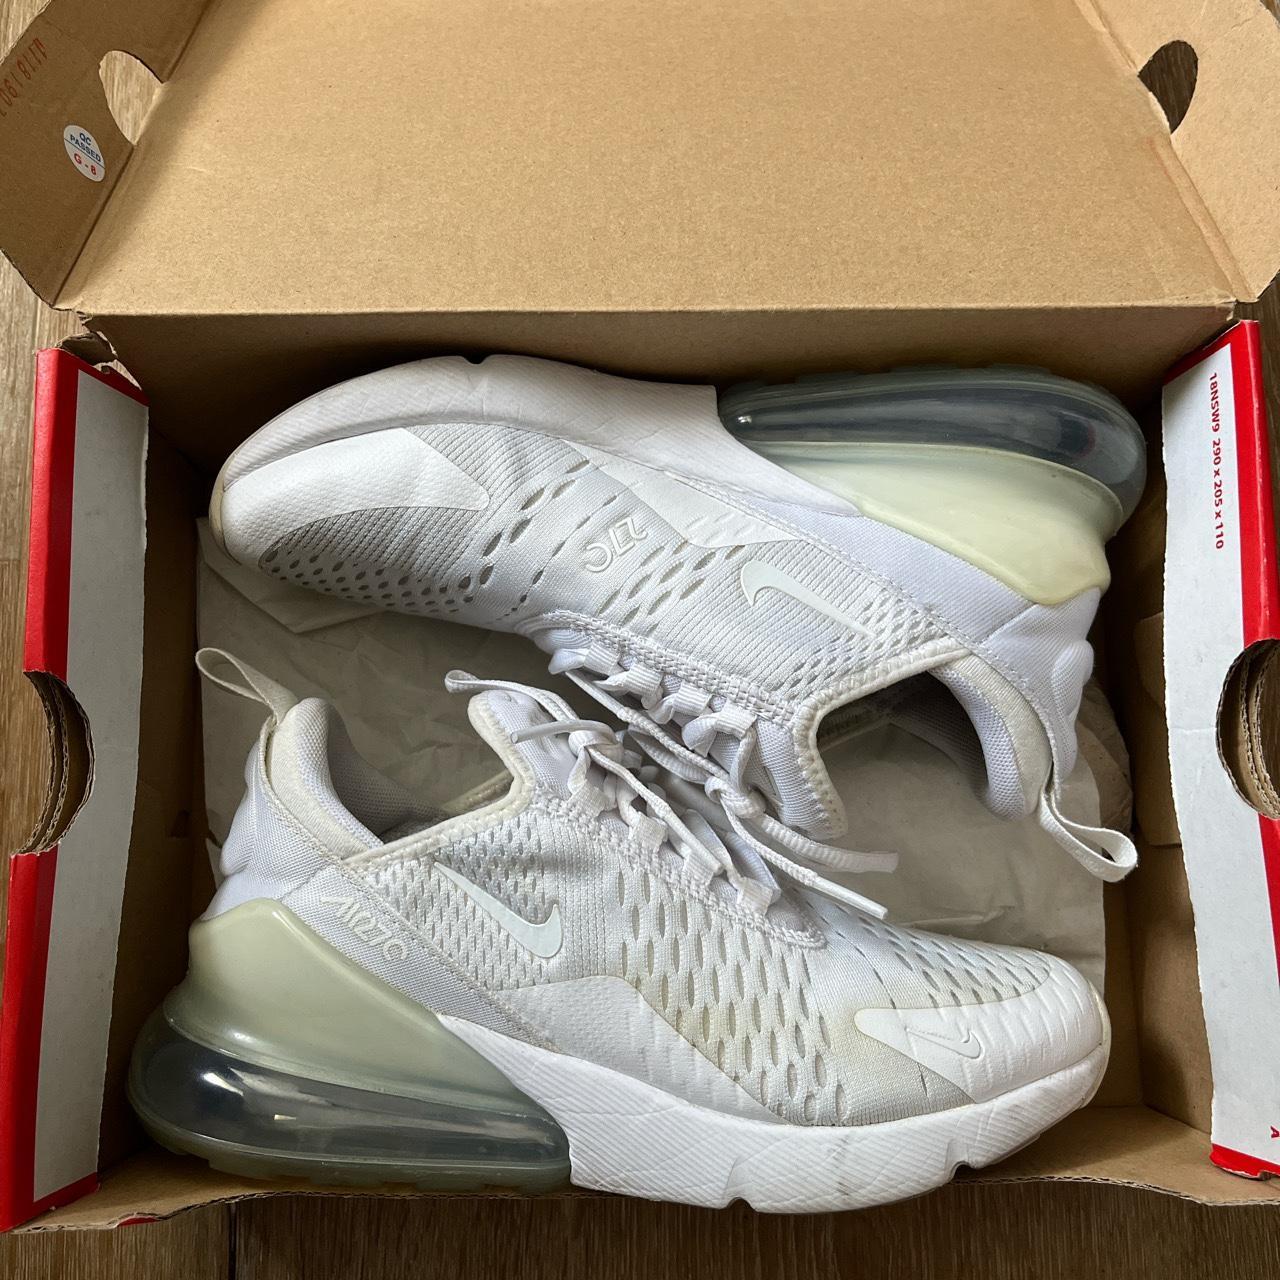 Nike Air Max 270 Size: 5 Box included #nike... - Depop